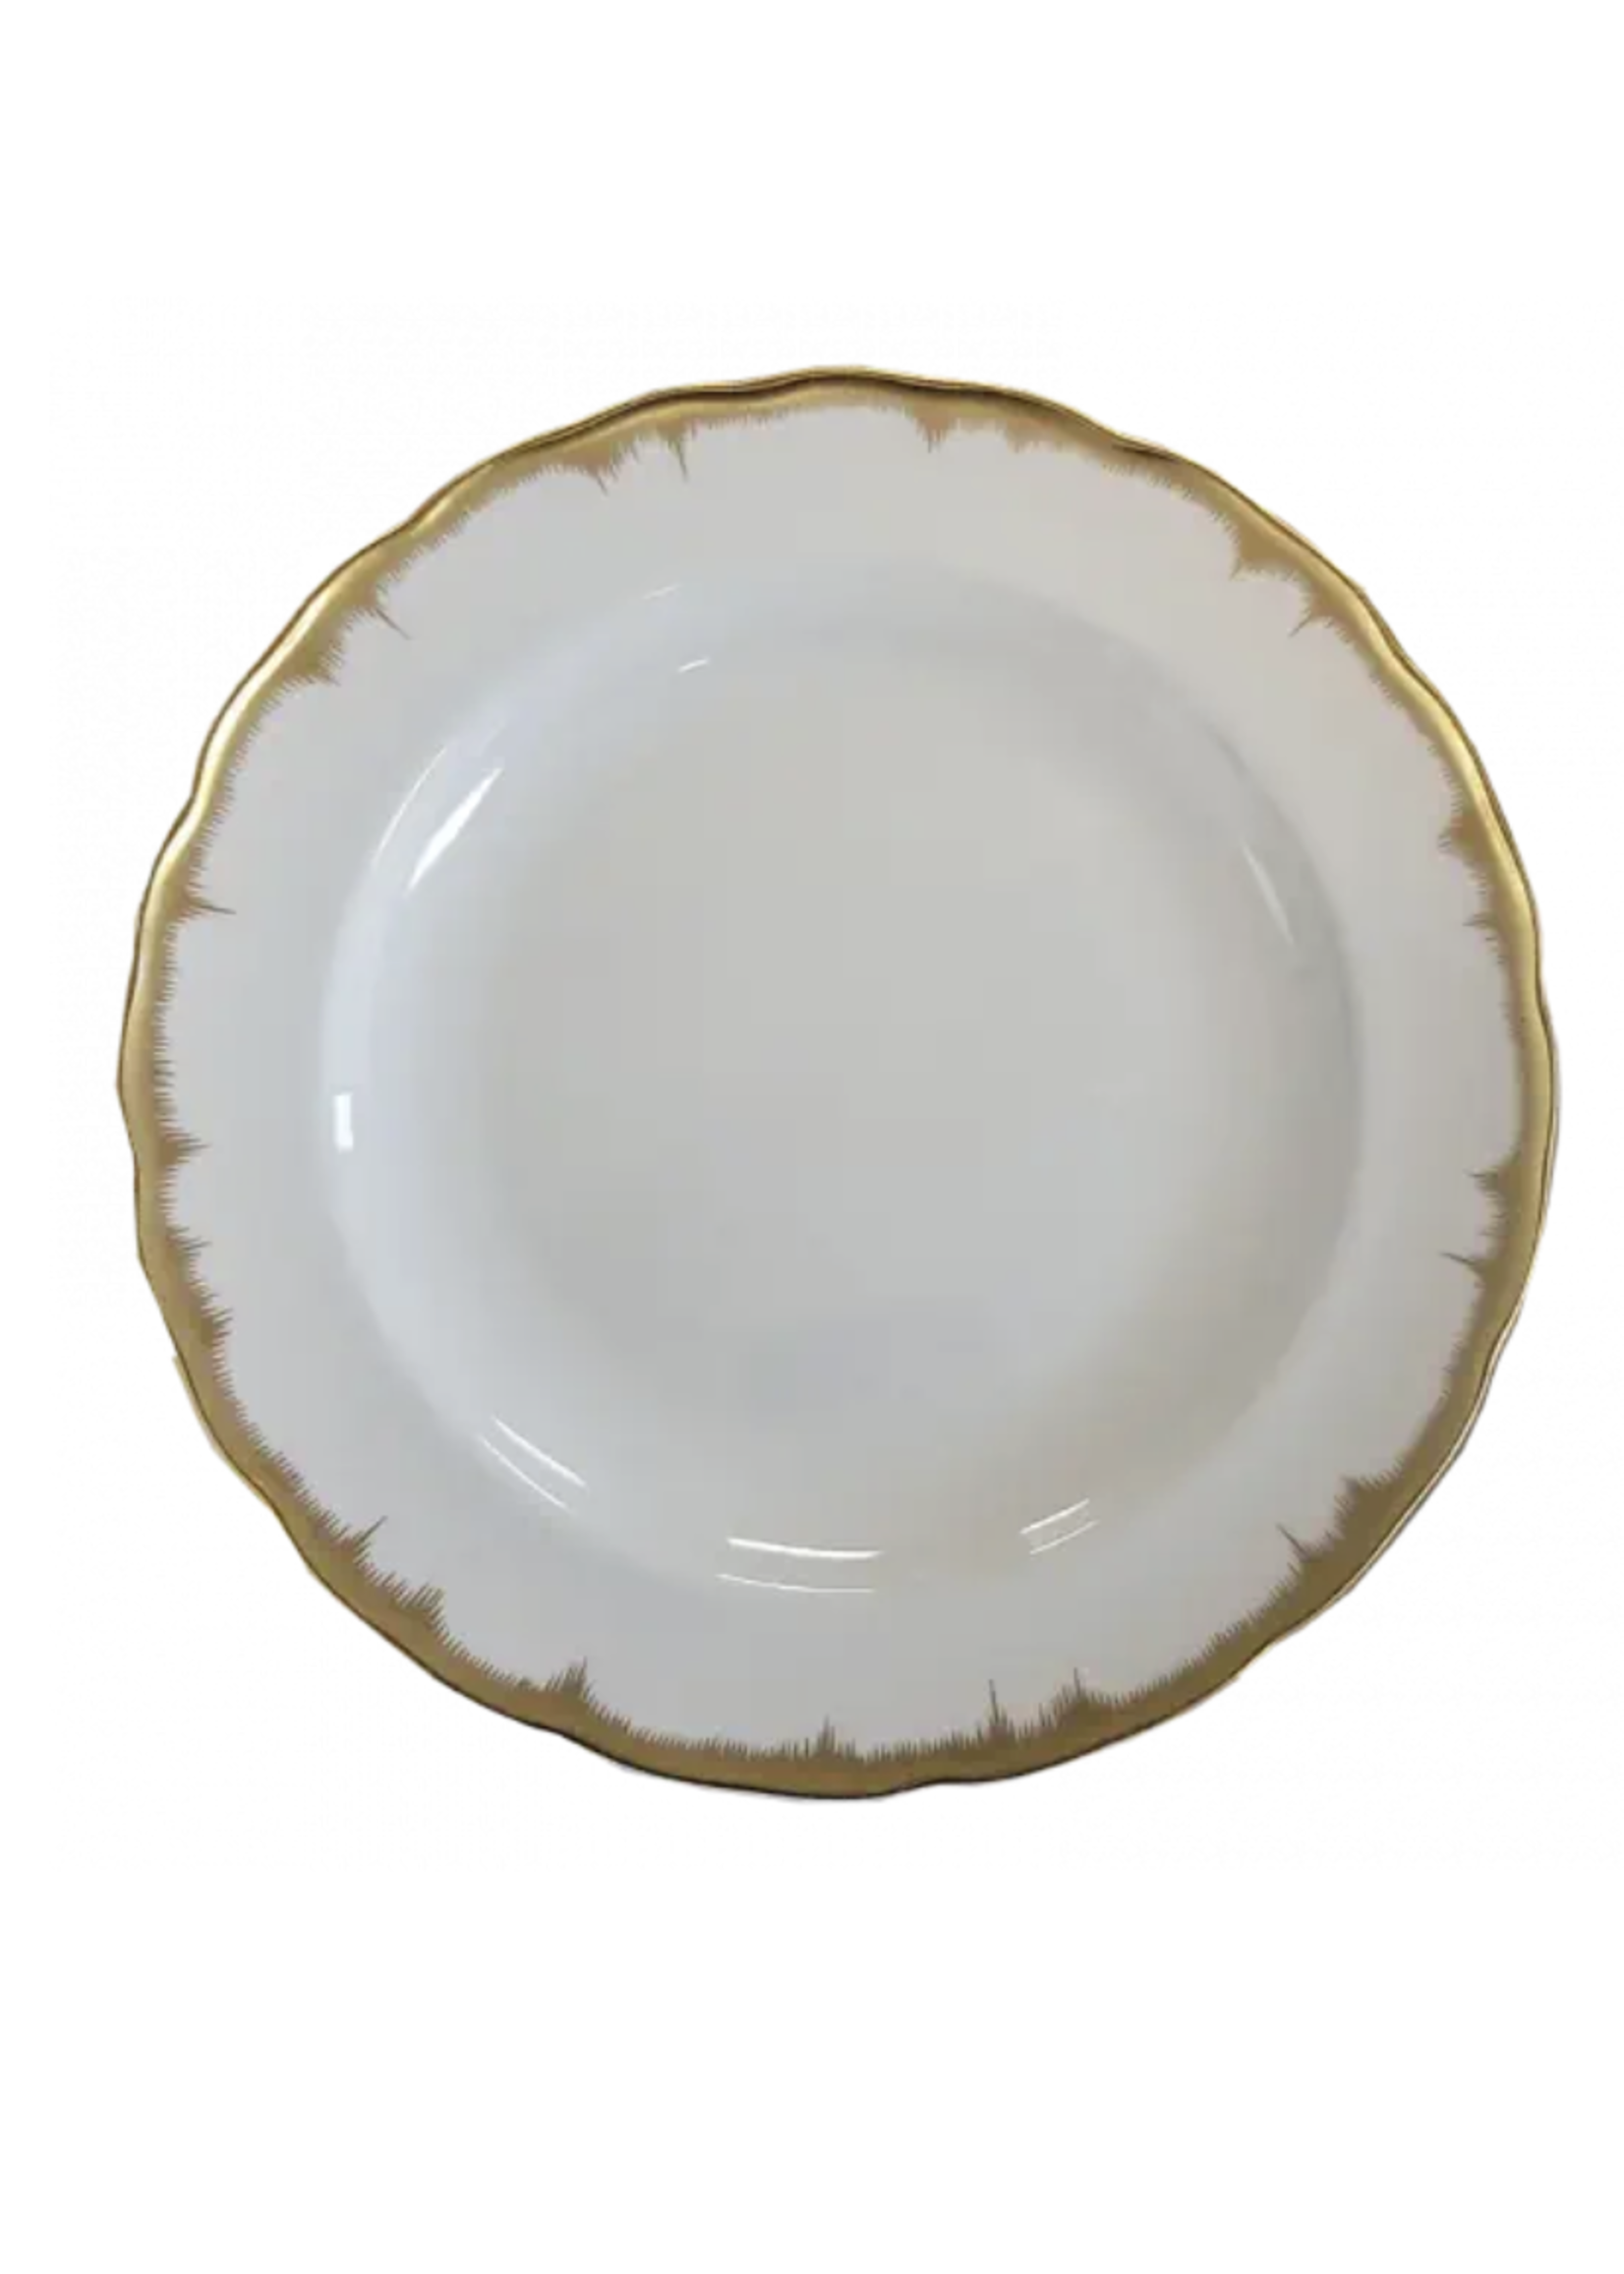 Mottahedeh Chelsea Feather Gold Dinner Plate